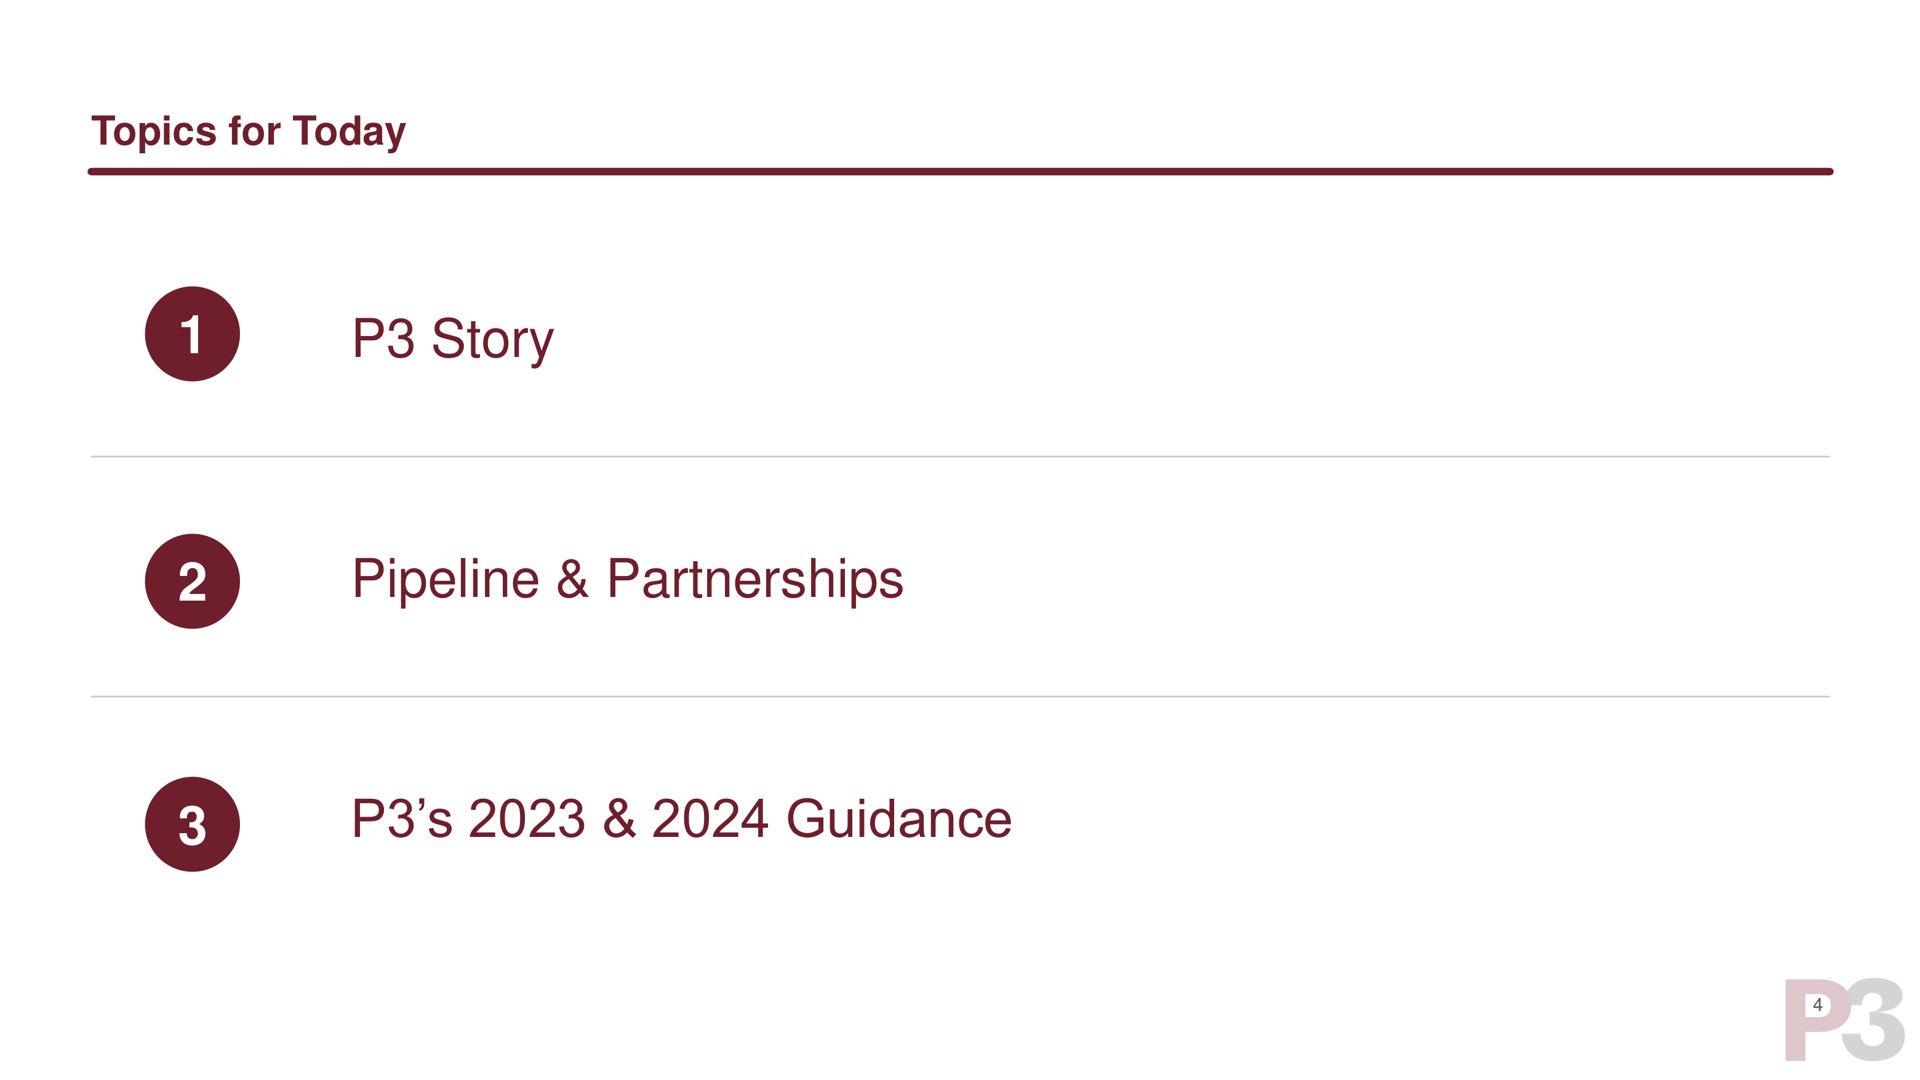 topics for today story pipeline partnerships guidance | P3 Health Partners